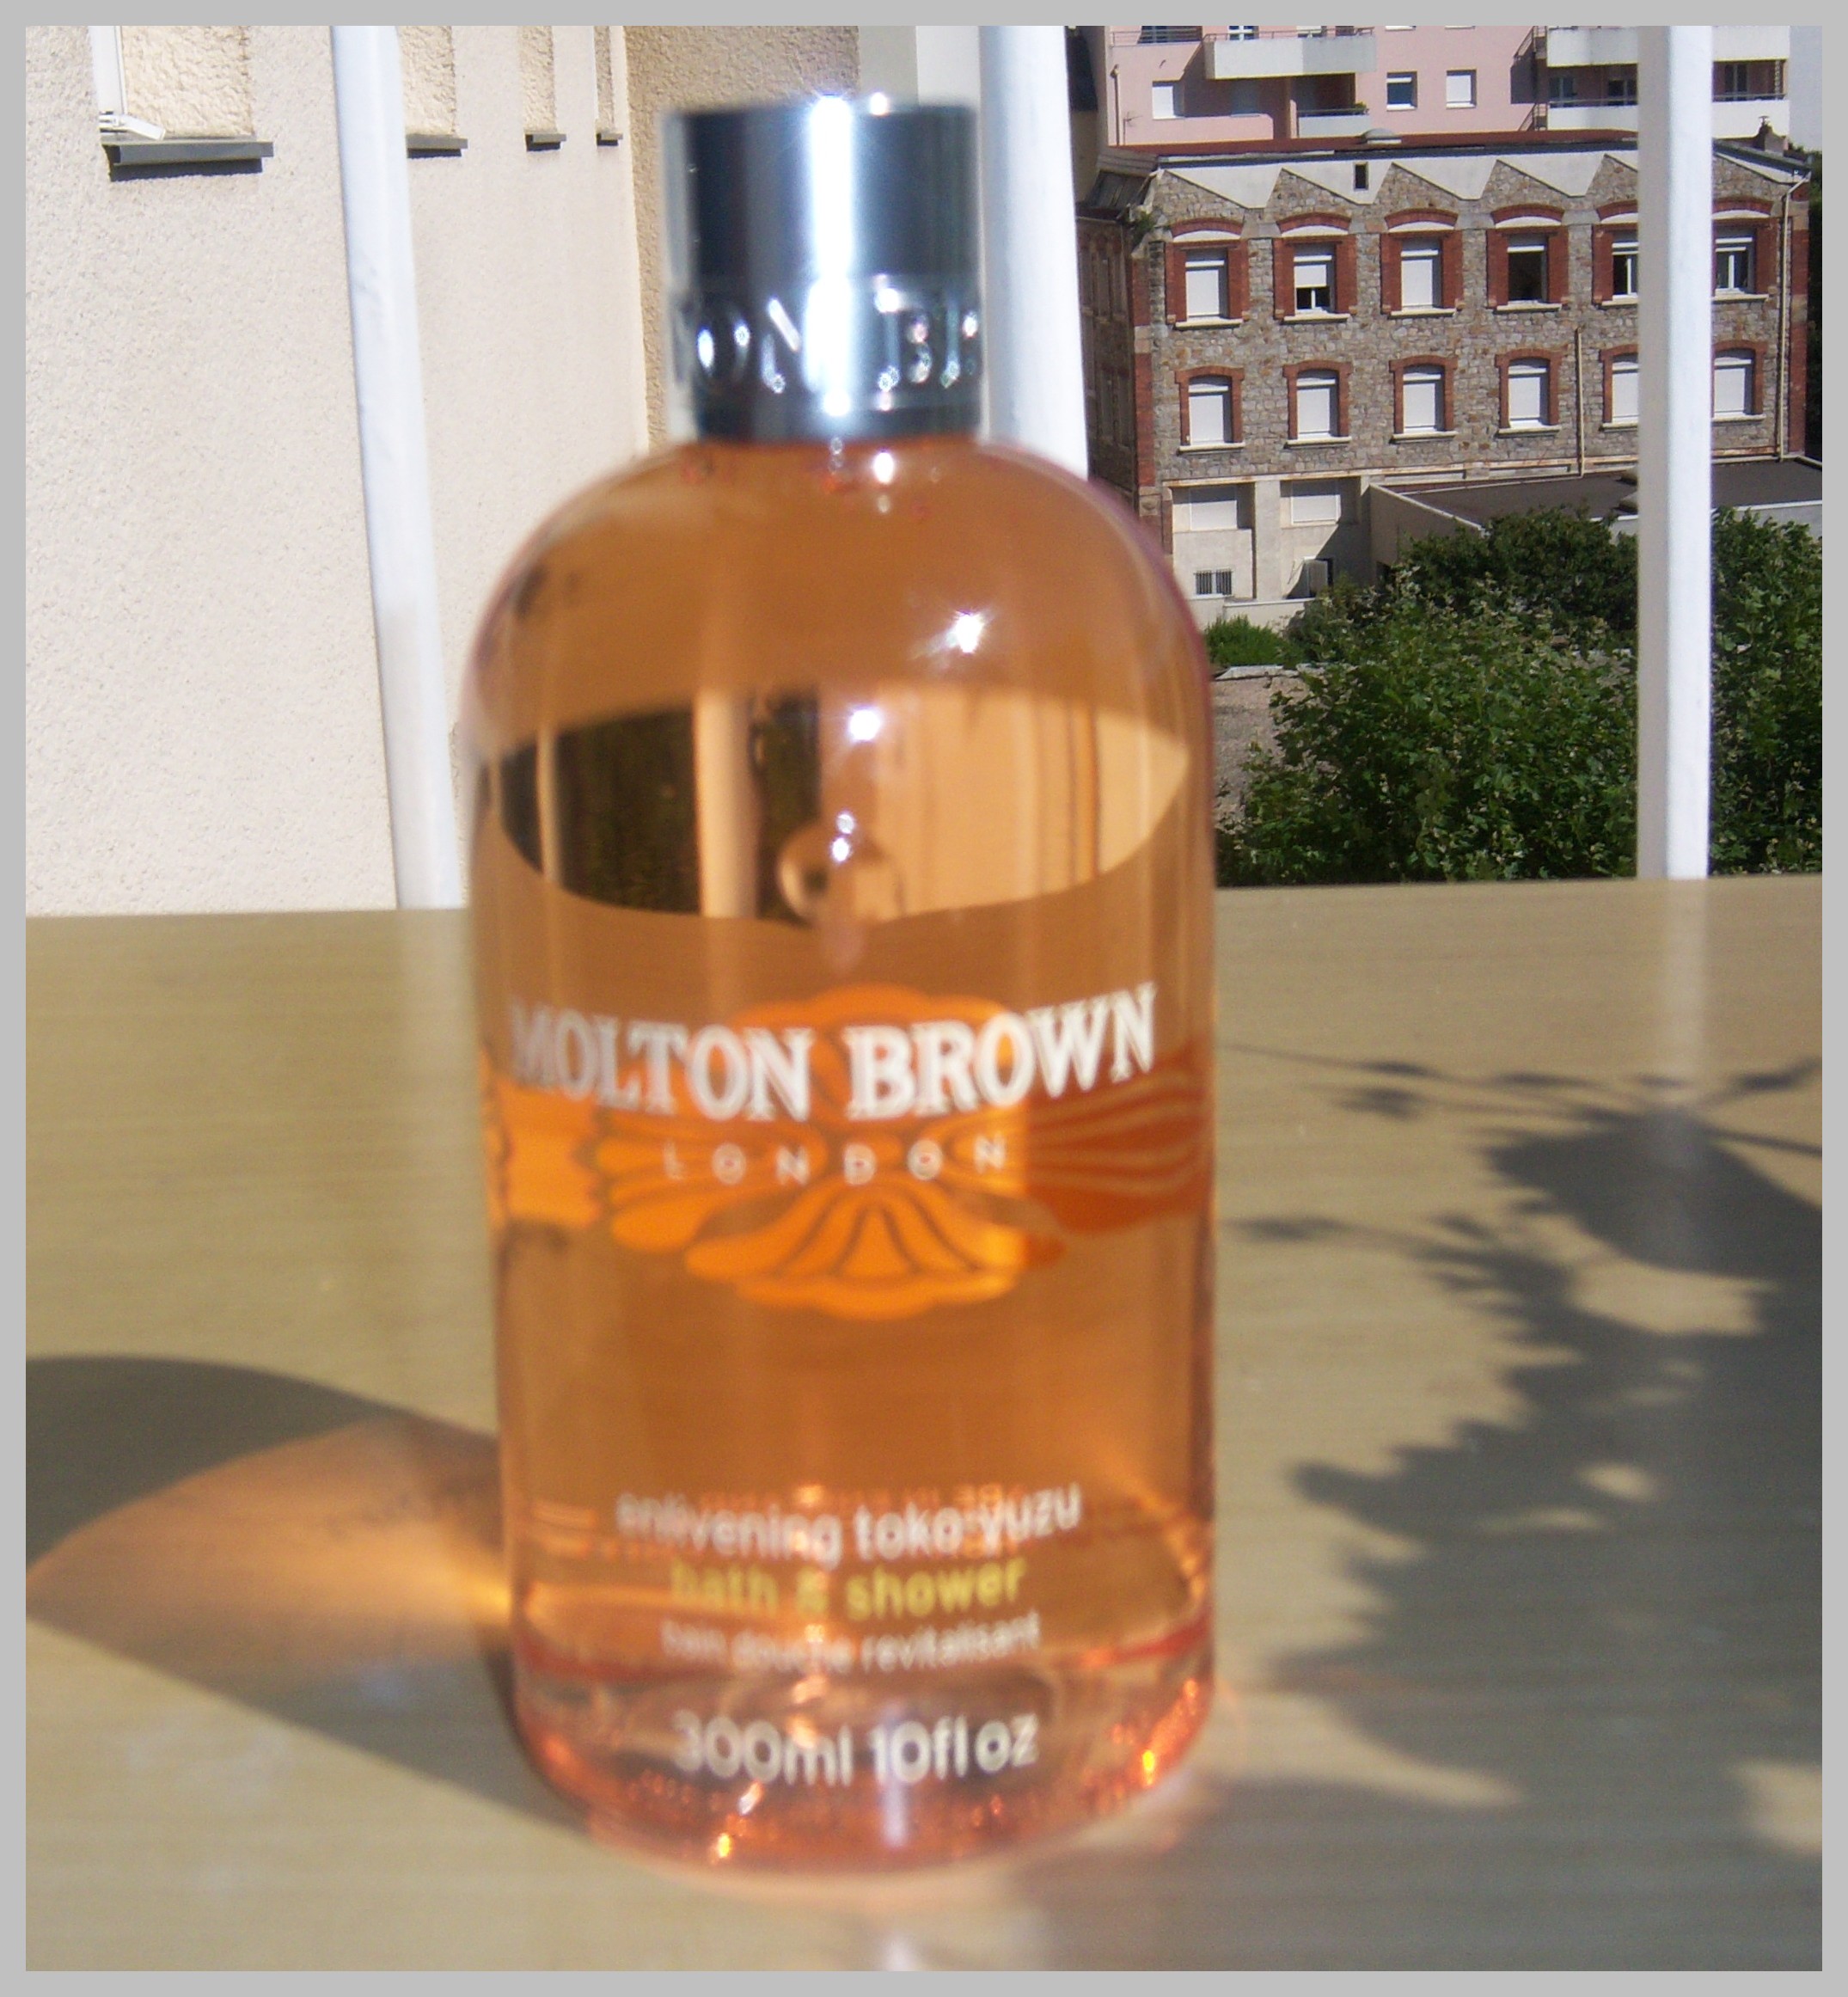 Moltown Brown